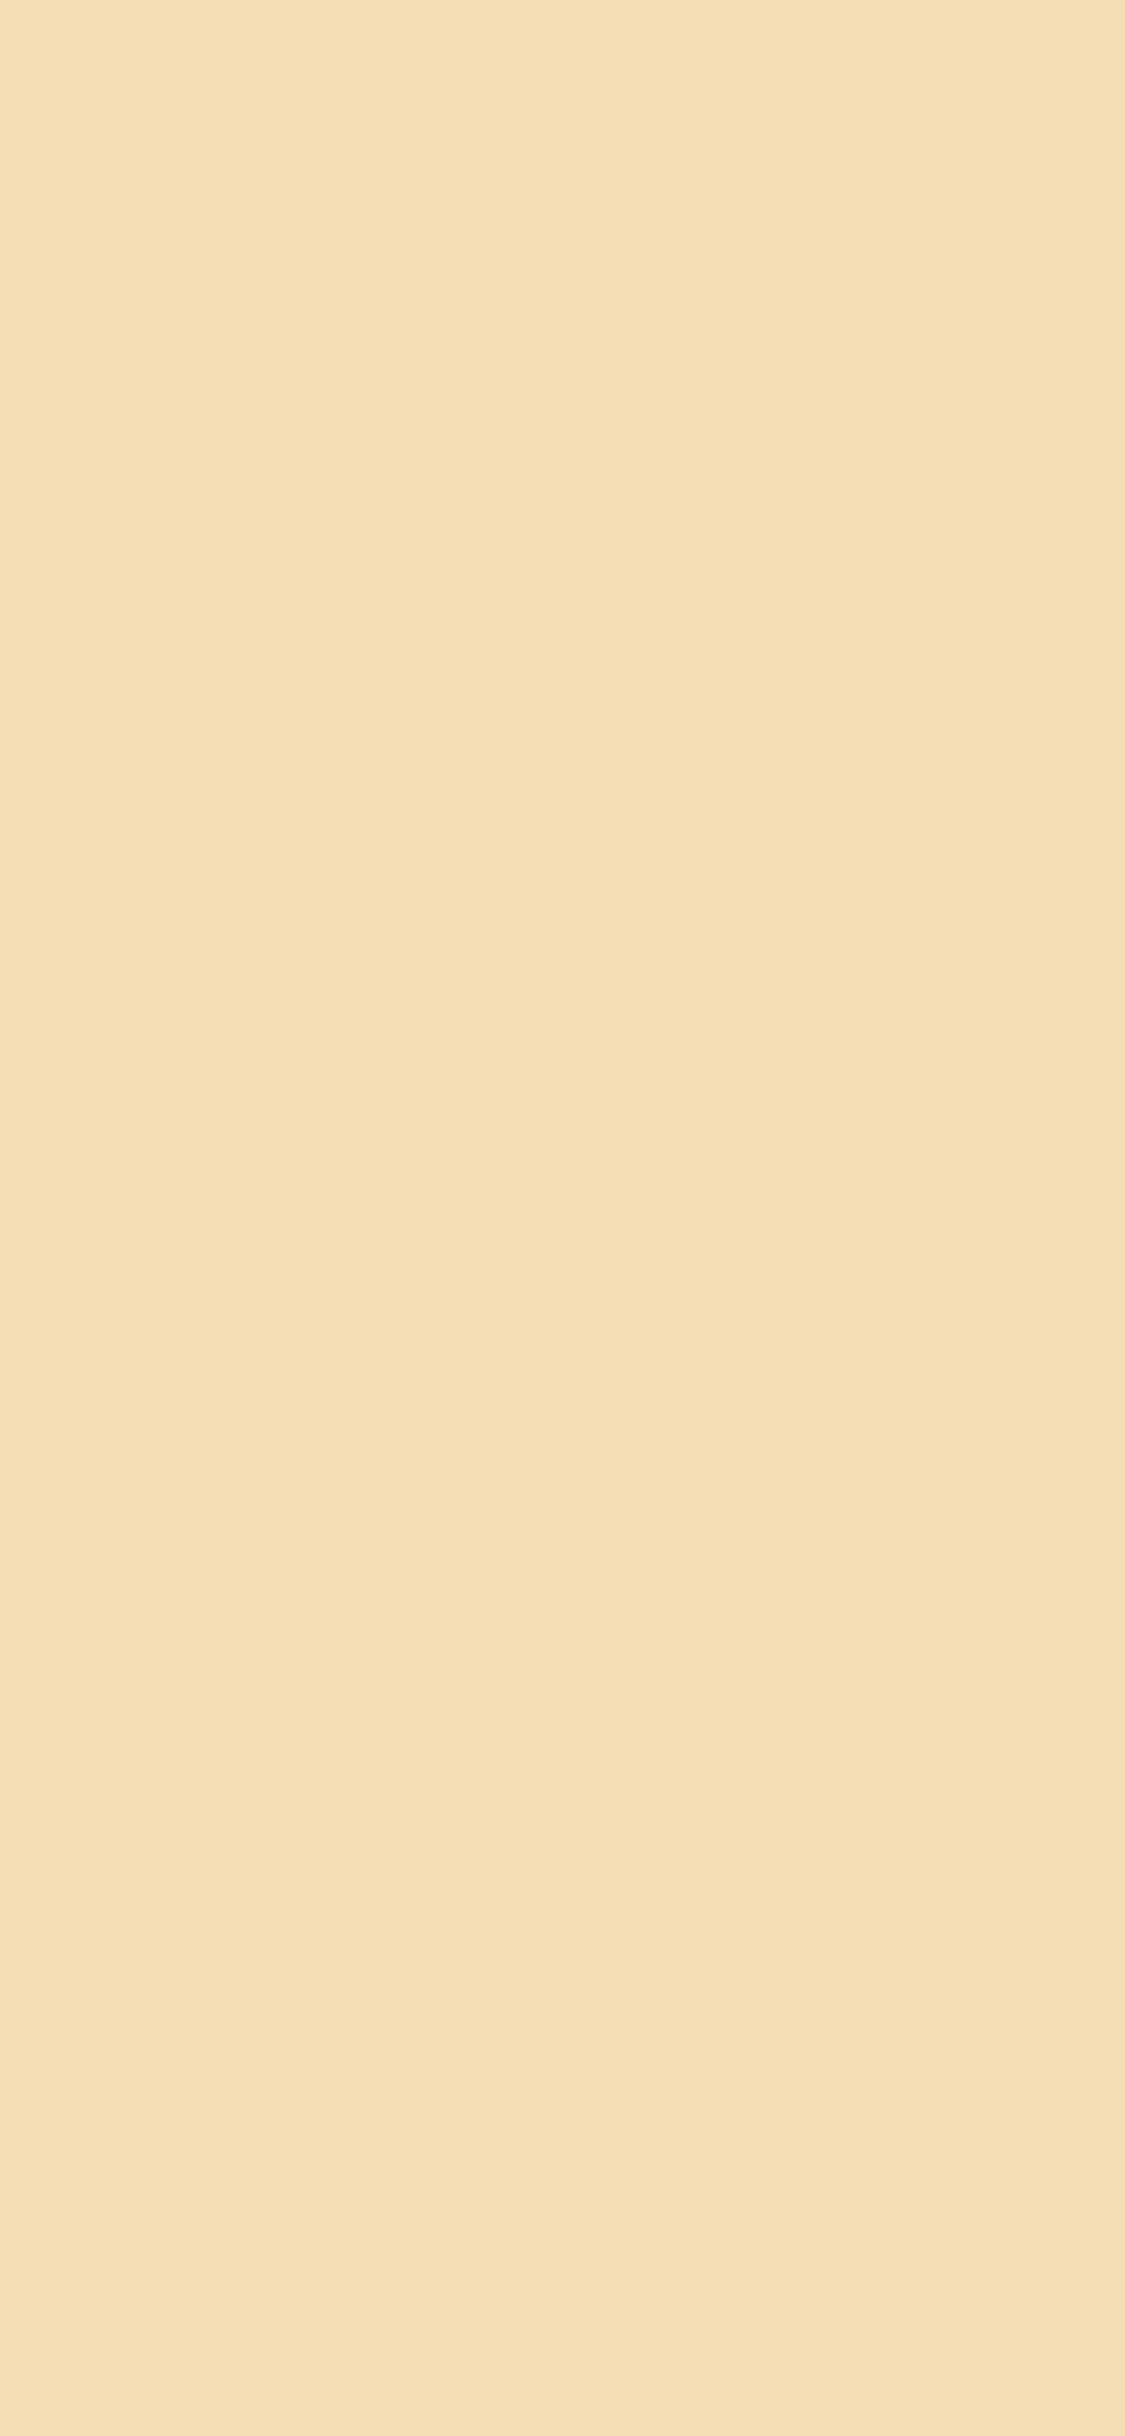 1125x2436 Wheat Solid Color Background